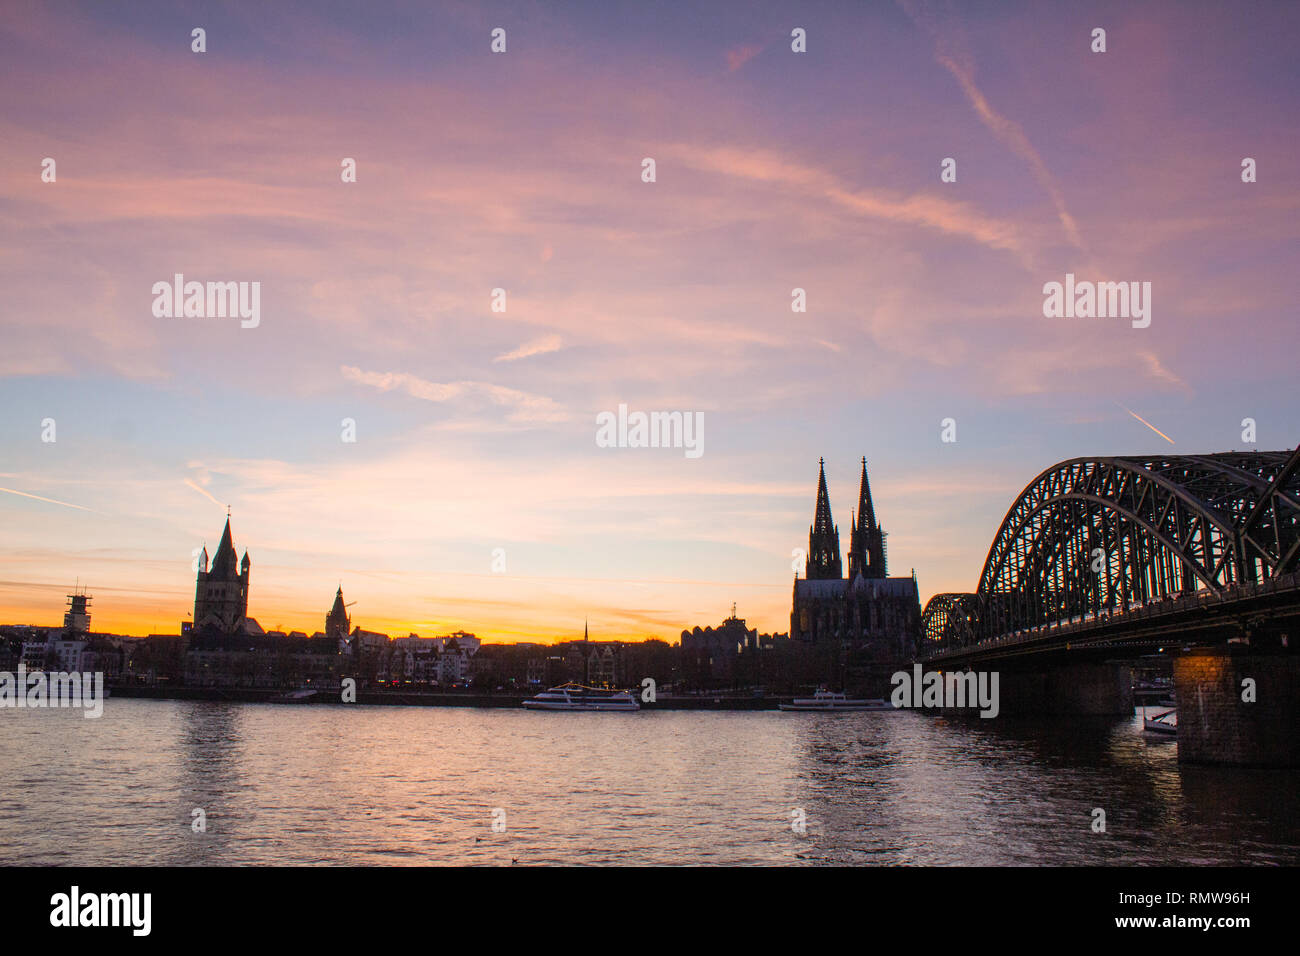 Panoramic view of Cologne, Germany with Cologne Cathedral, Hohenzollern Bridge and Old Town at sunset with beautiful colored sky Stock Photo